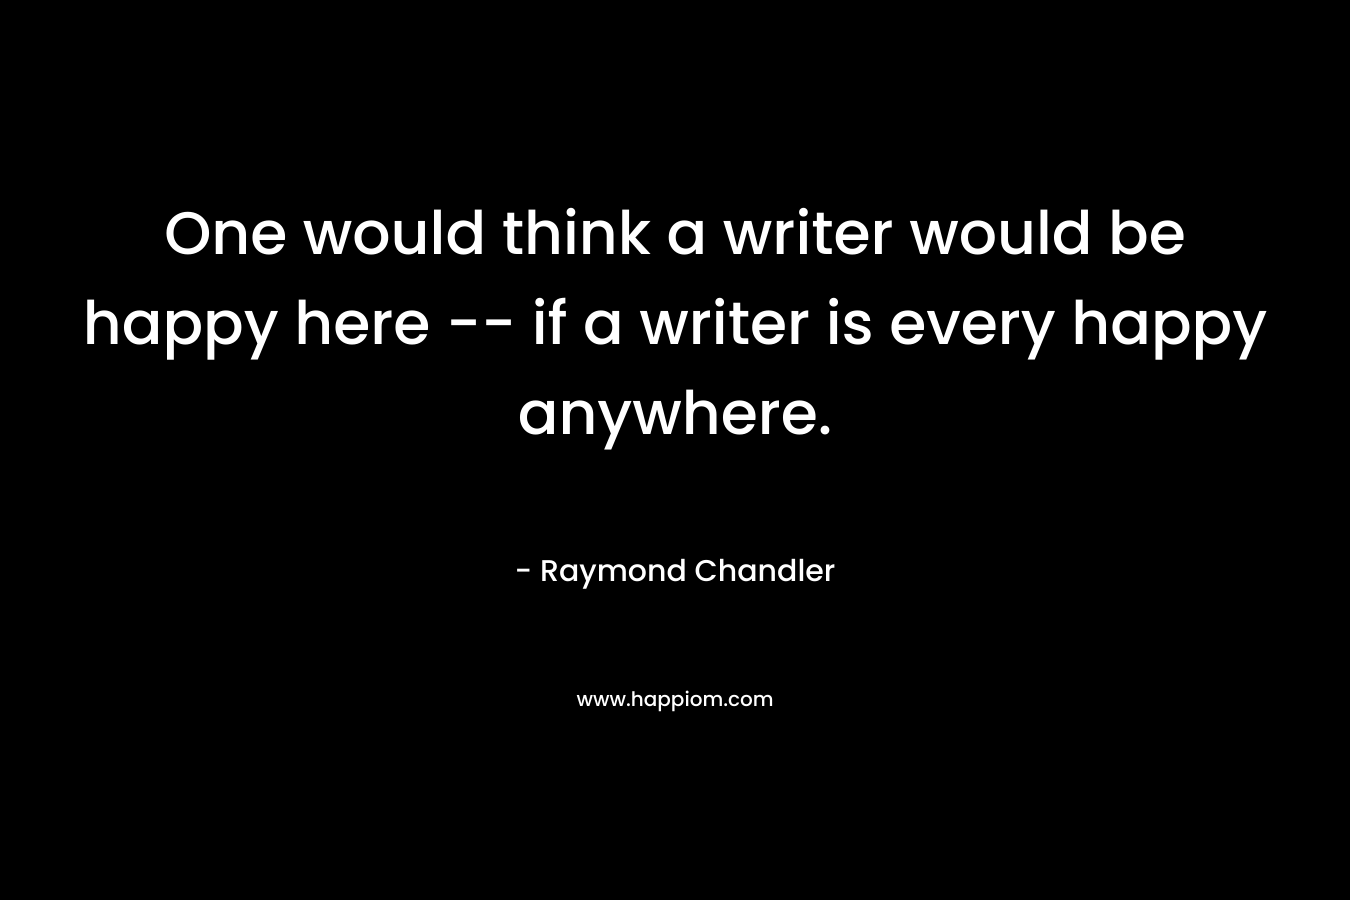 One would think a writer would be happy here — if a writer is every happy anywhere. – Raymond Chandler